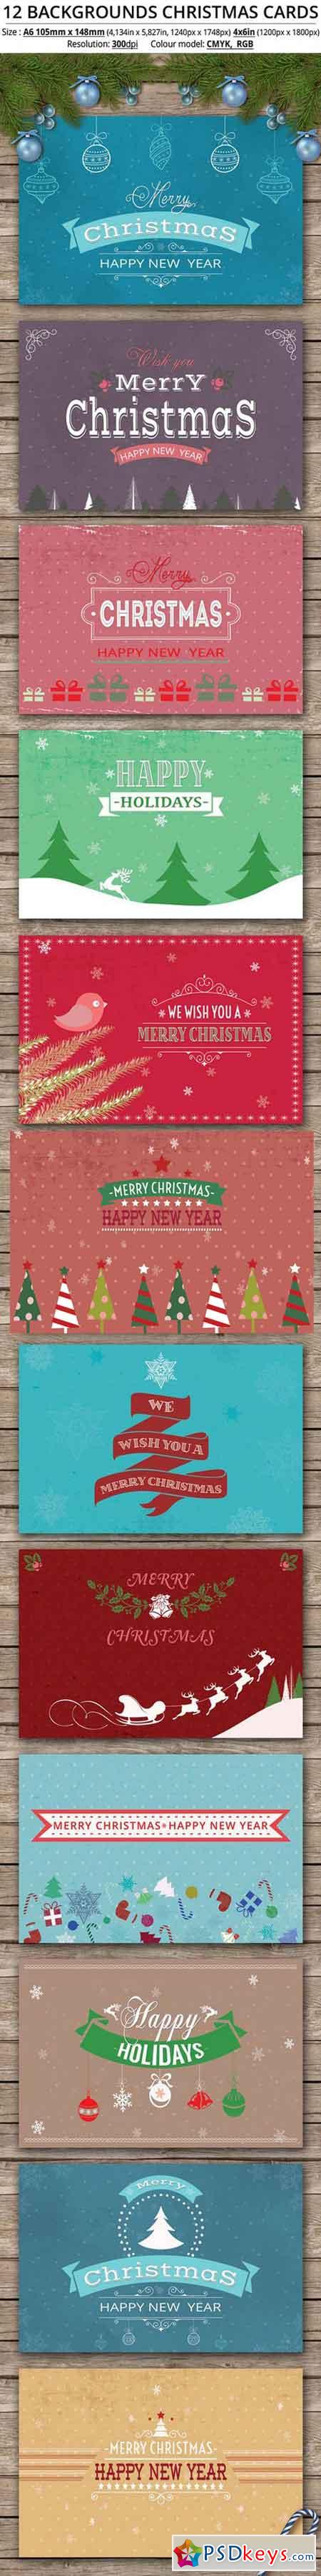 12 Backgrounds Christmas Cards 388701